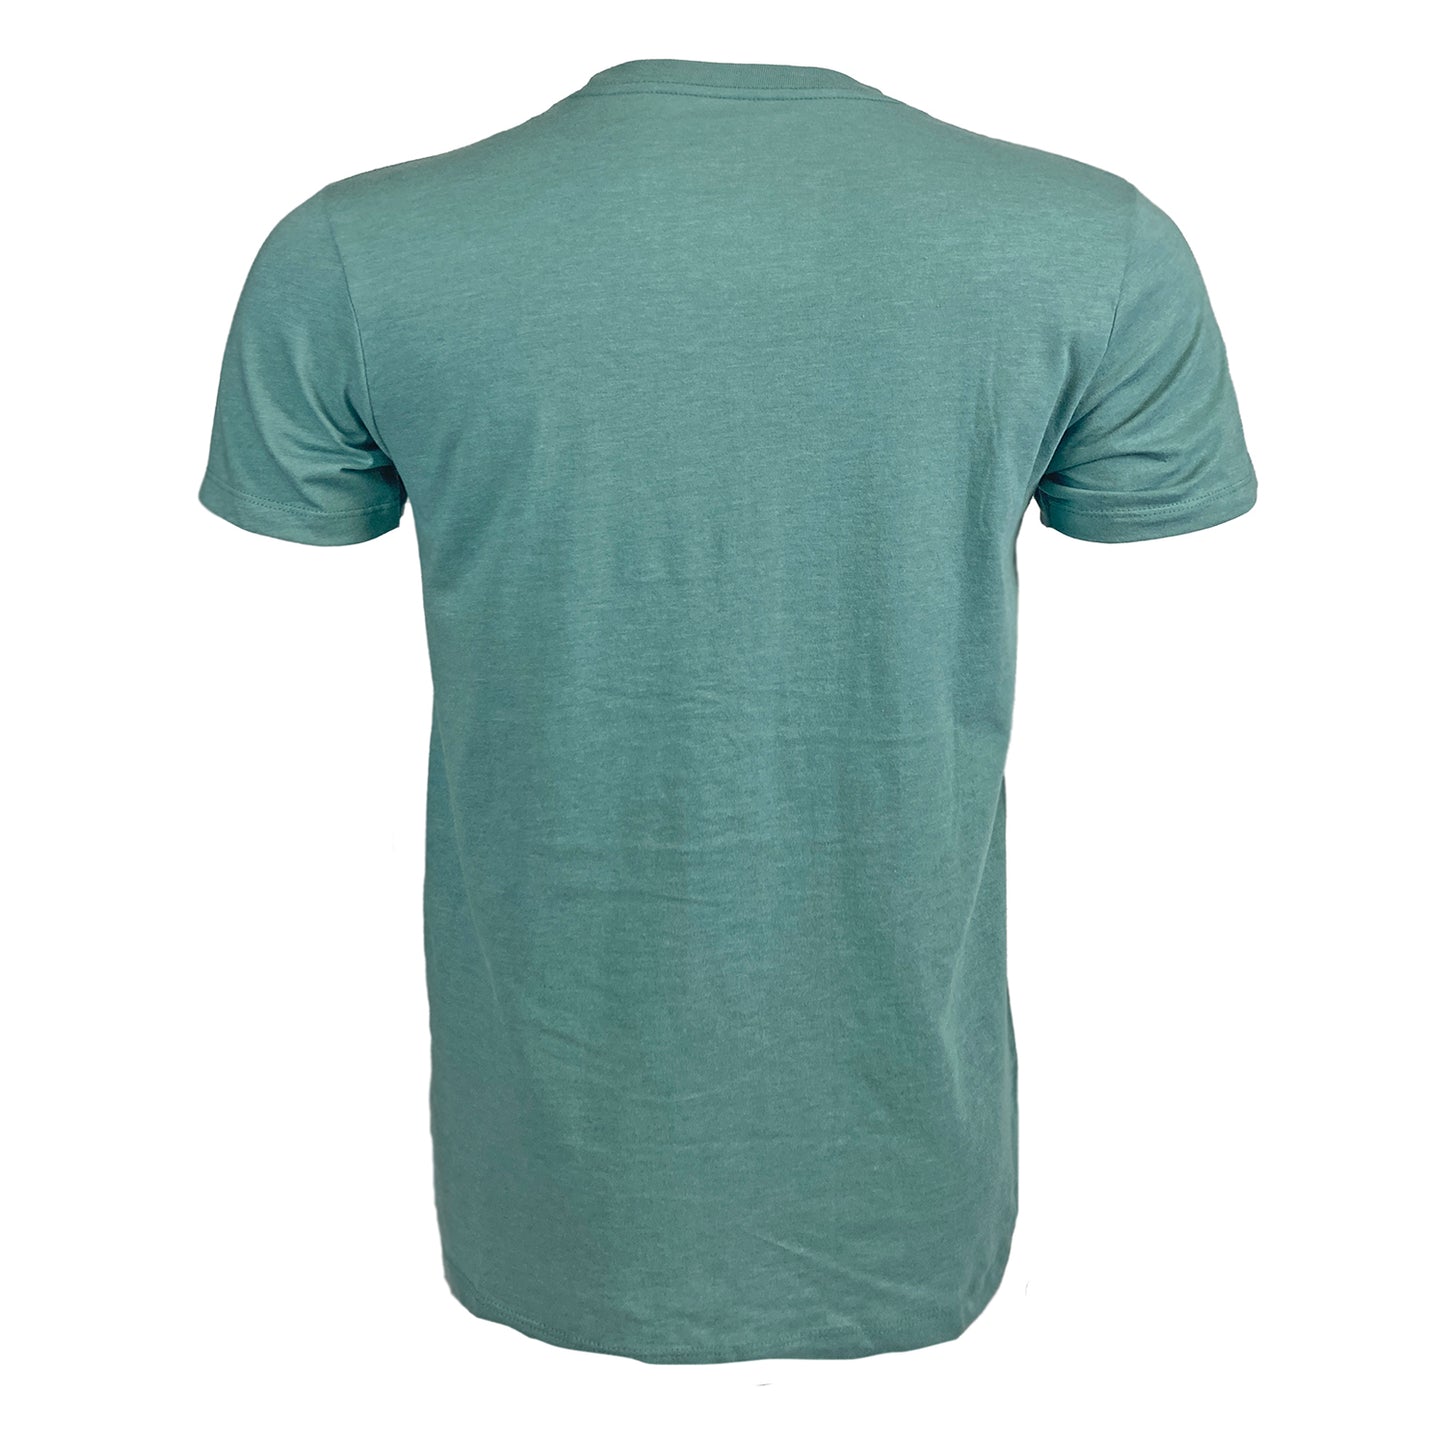 Blue green tee shown from the back.